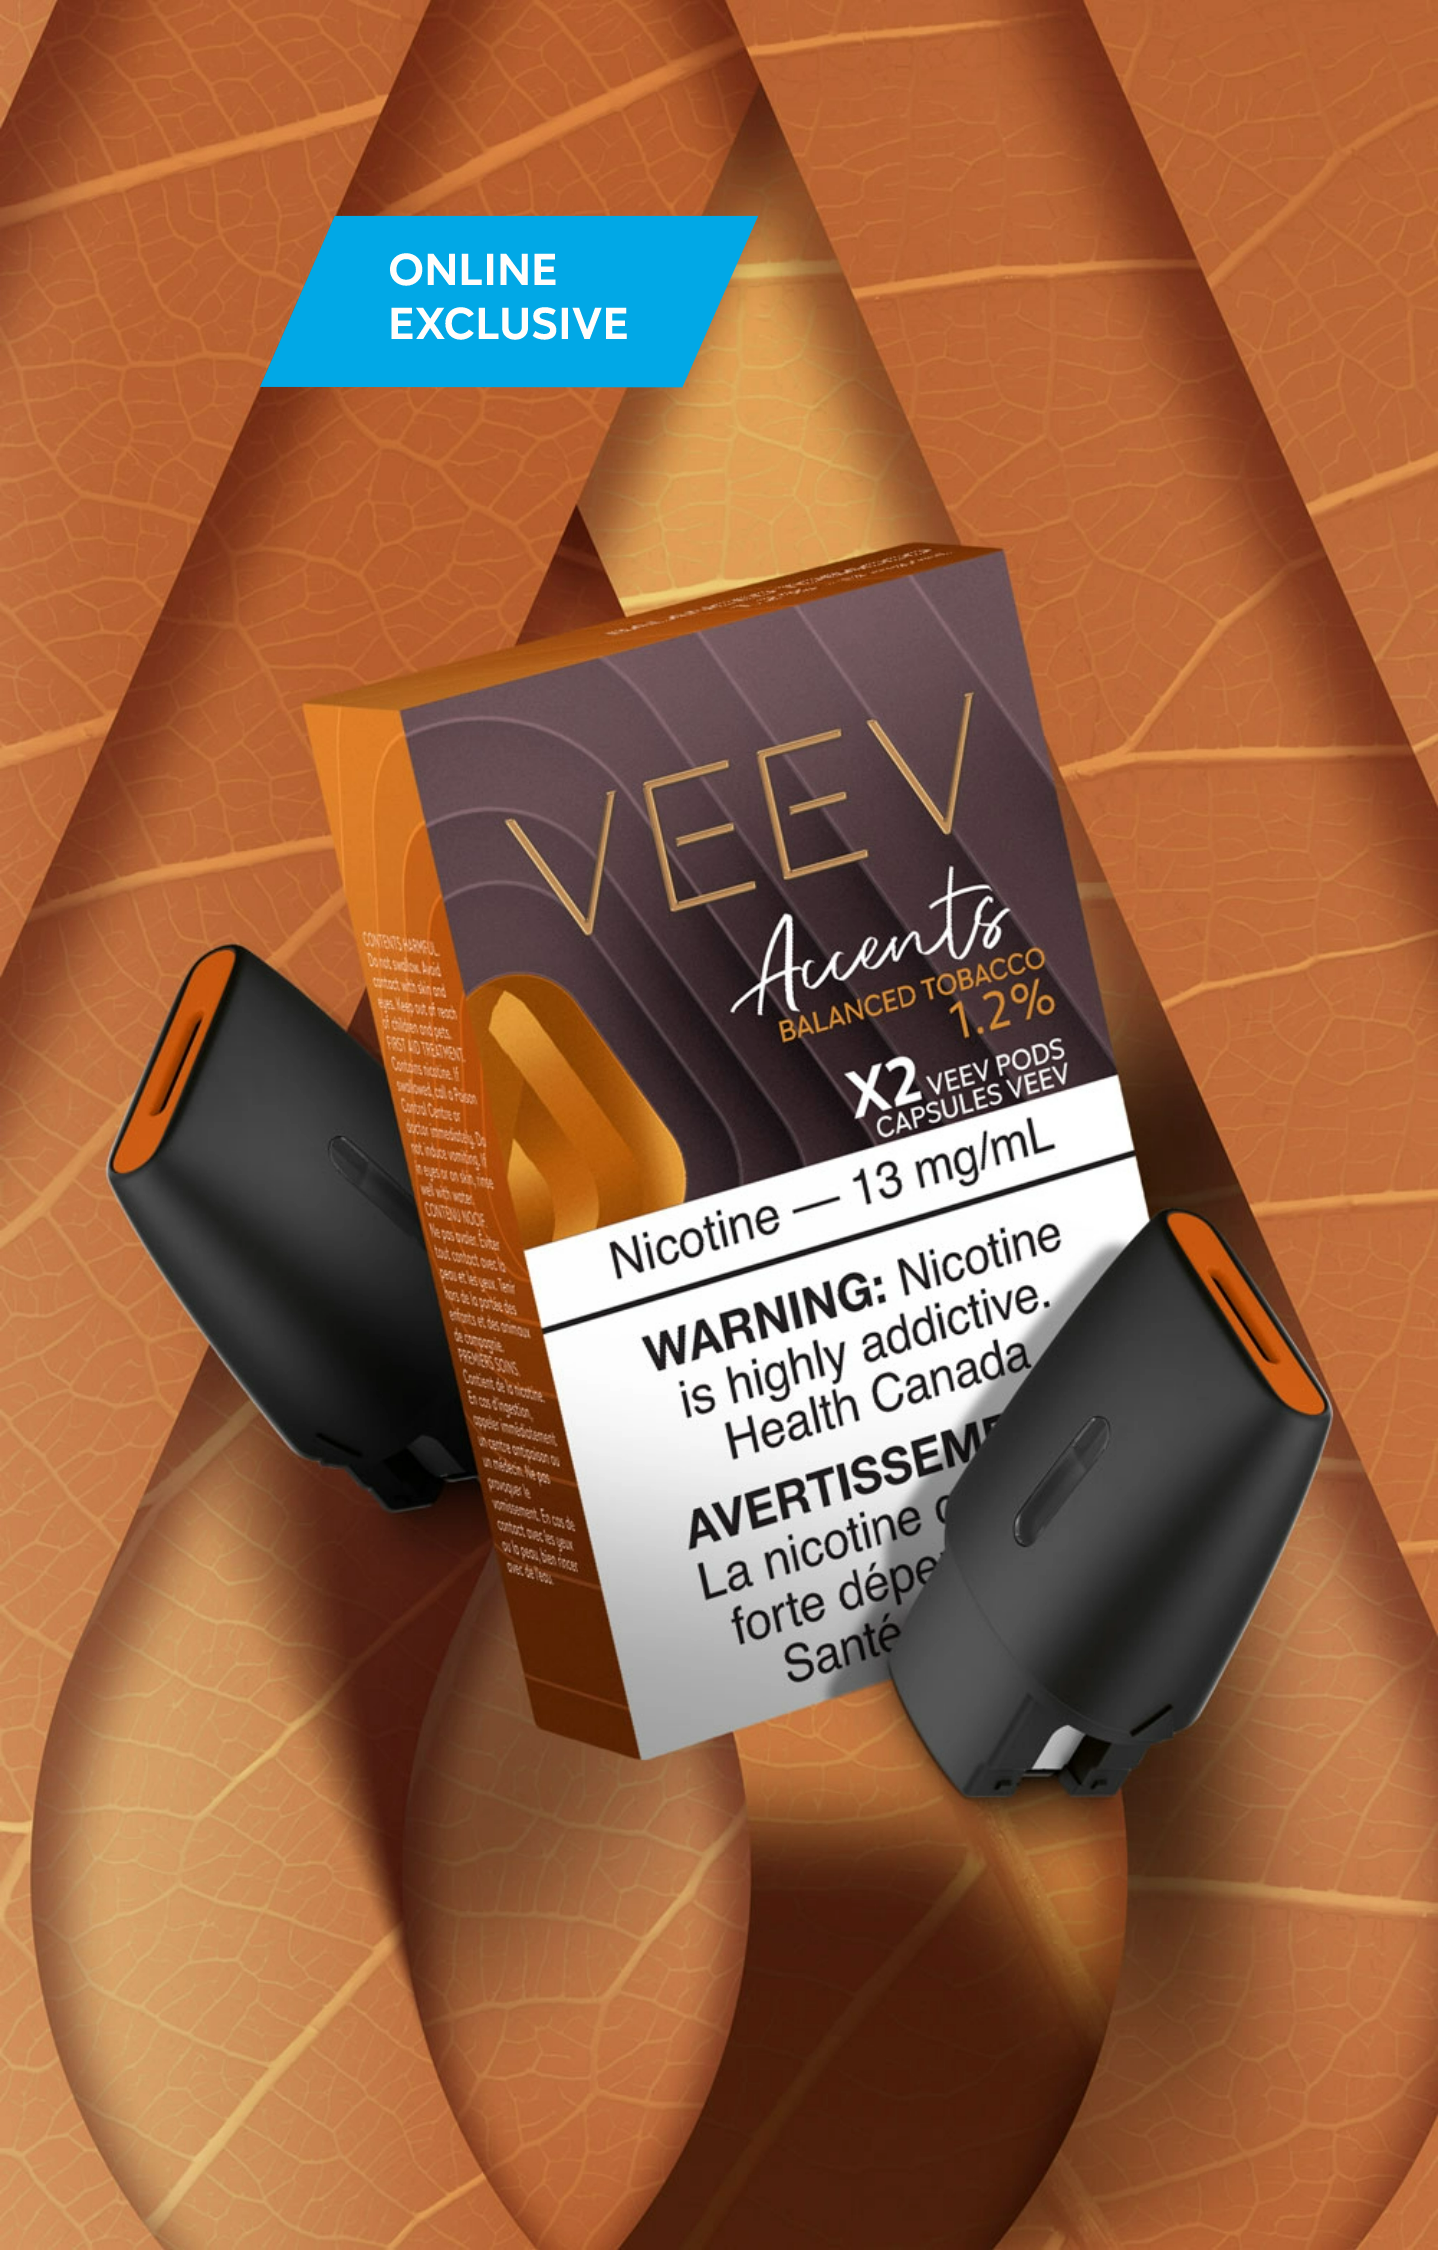 VEEV Accents Balanced tobacco pack